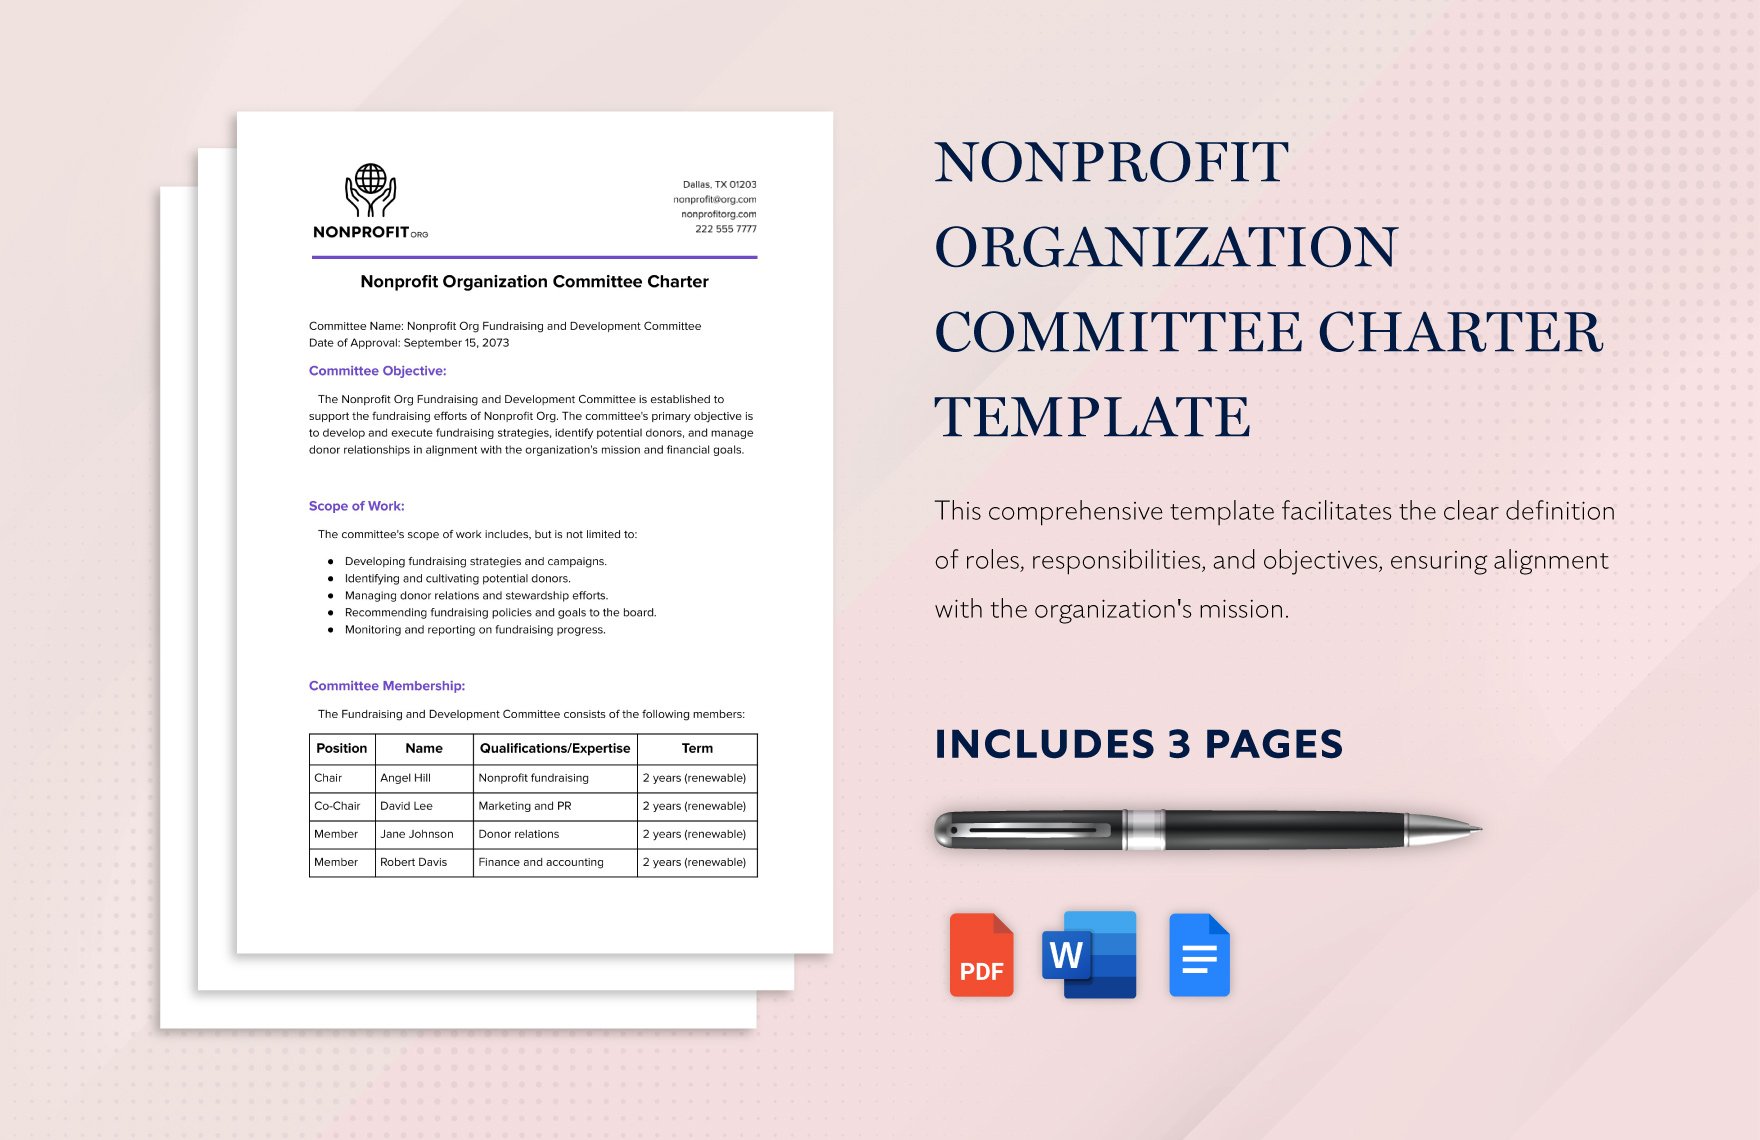 Nonprofit Organization Committee Charter Template in Word, Google Docs, PDF